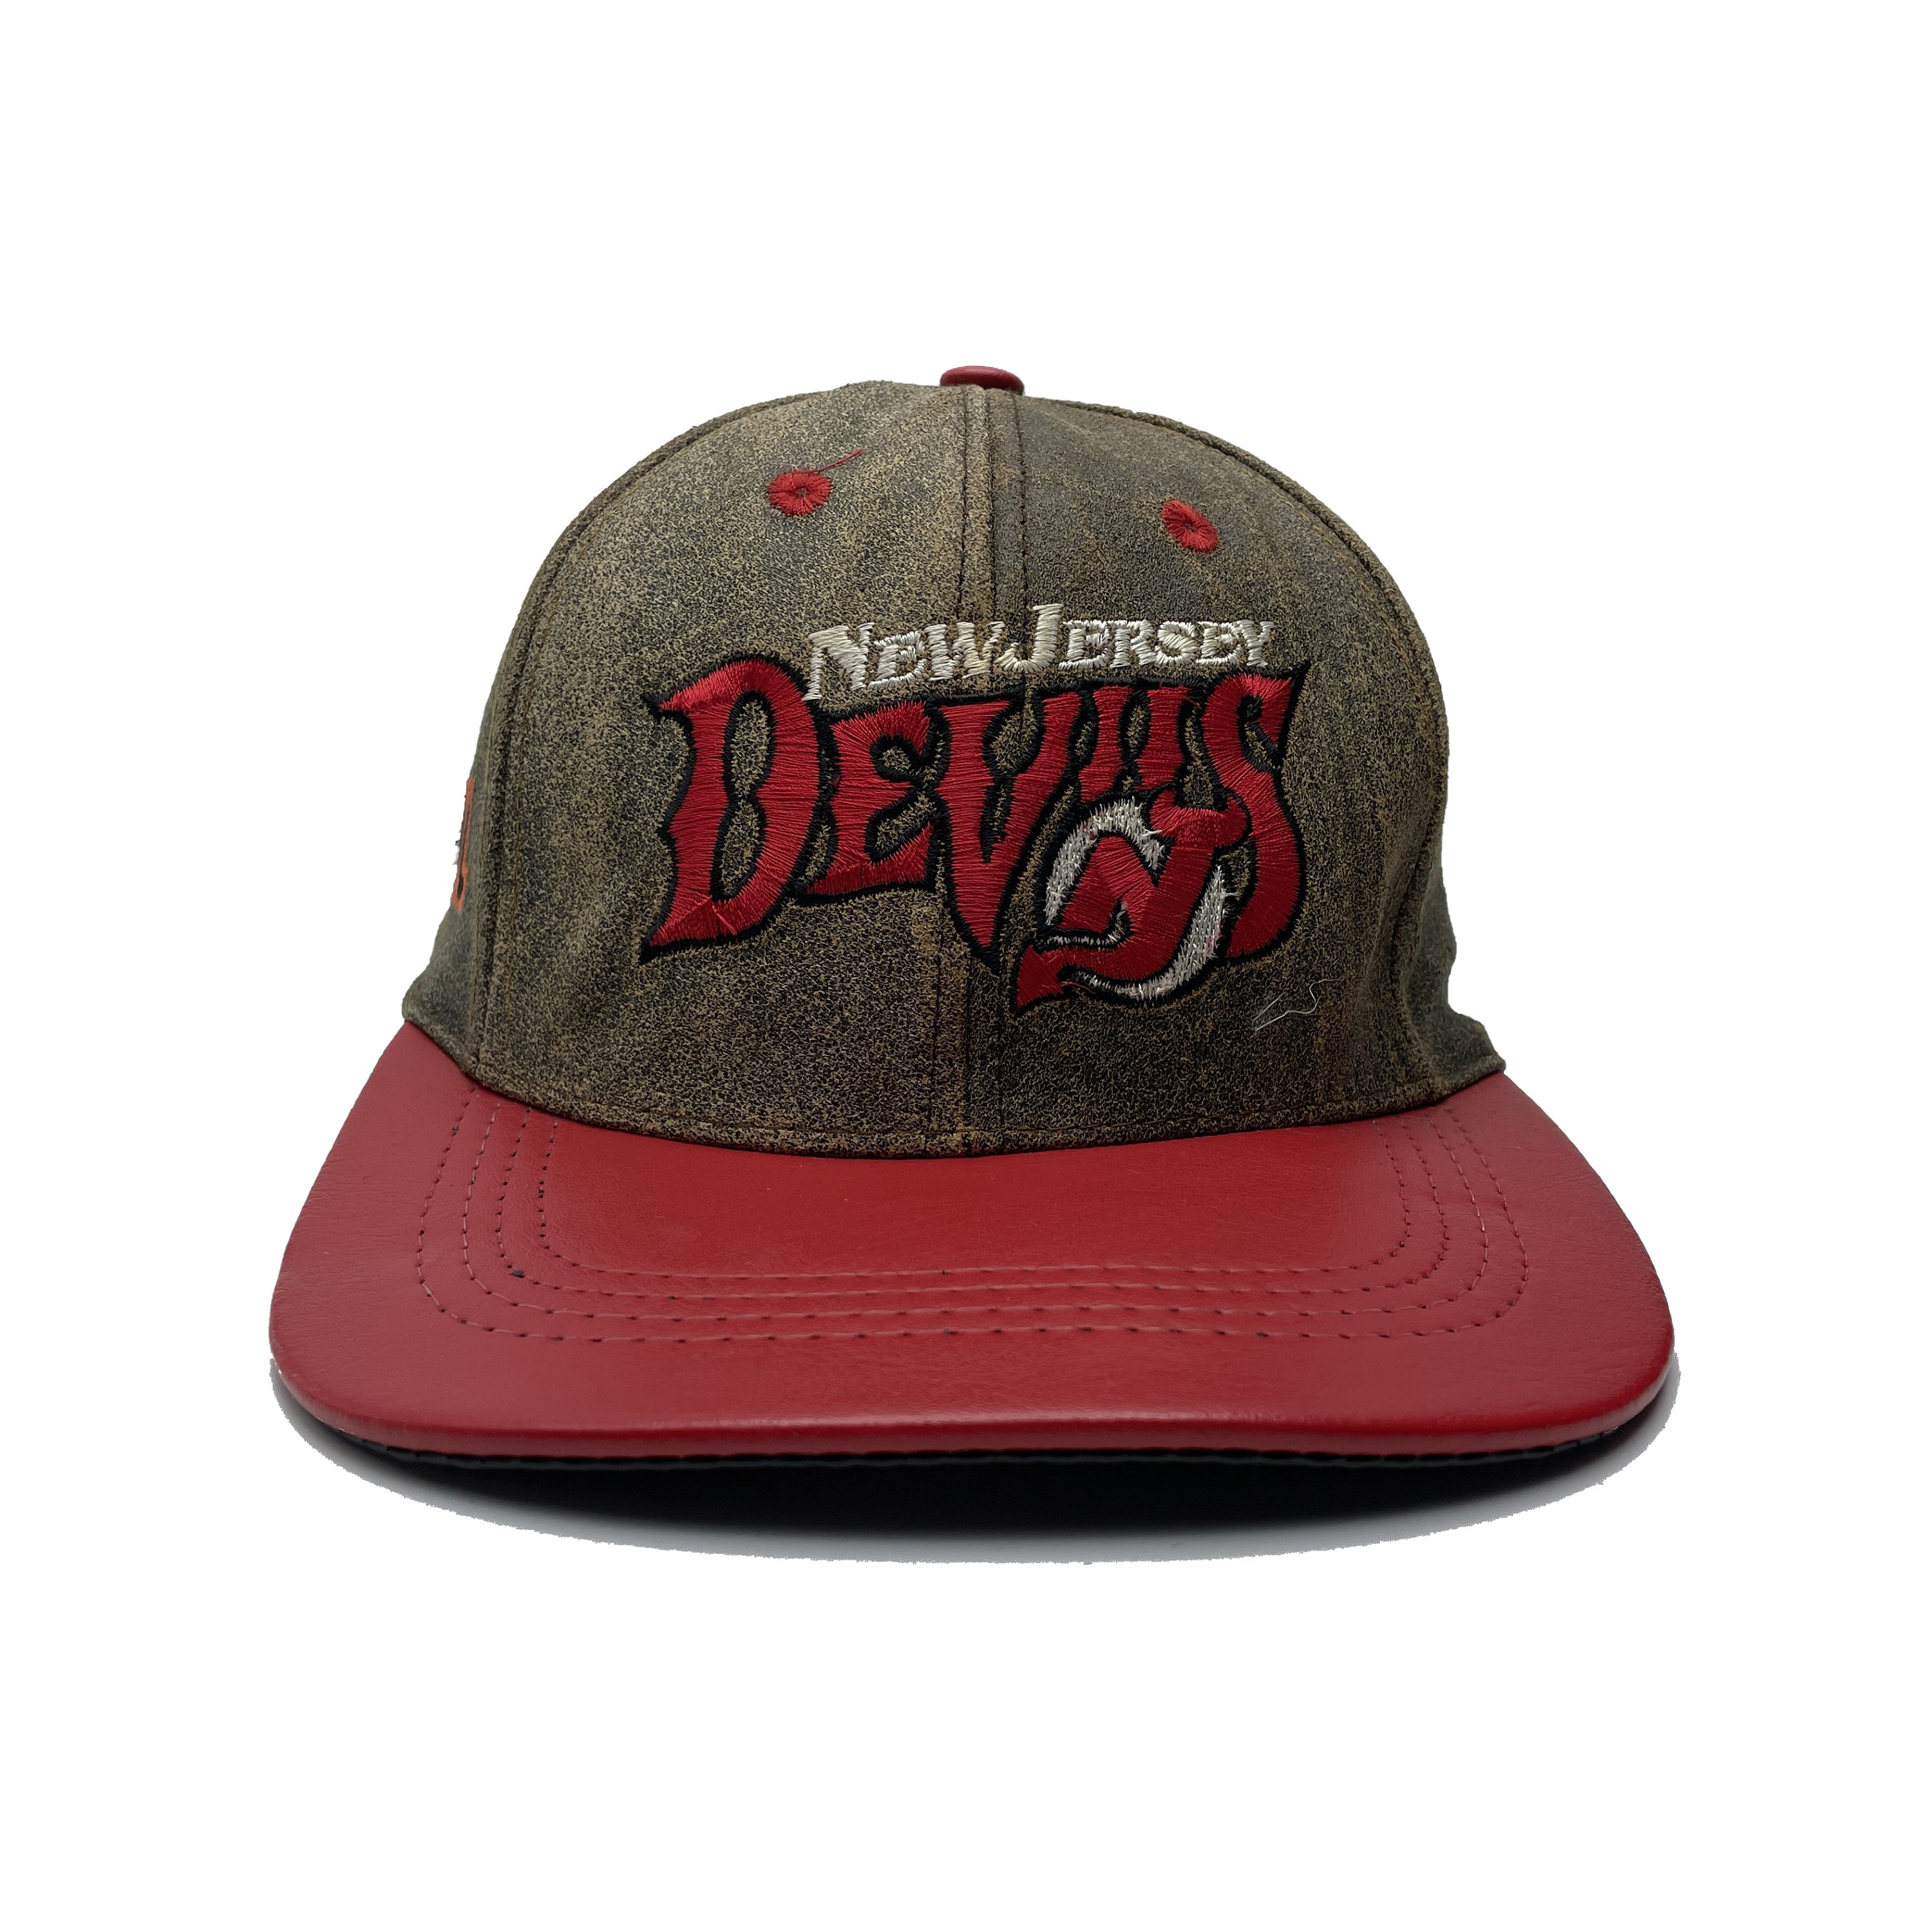 NEW JERSEY DEVILS CLASSIC LOGO WOOL SNAPBACK HAT (WHITE/RED) – Pro